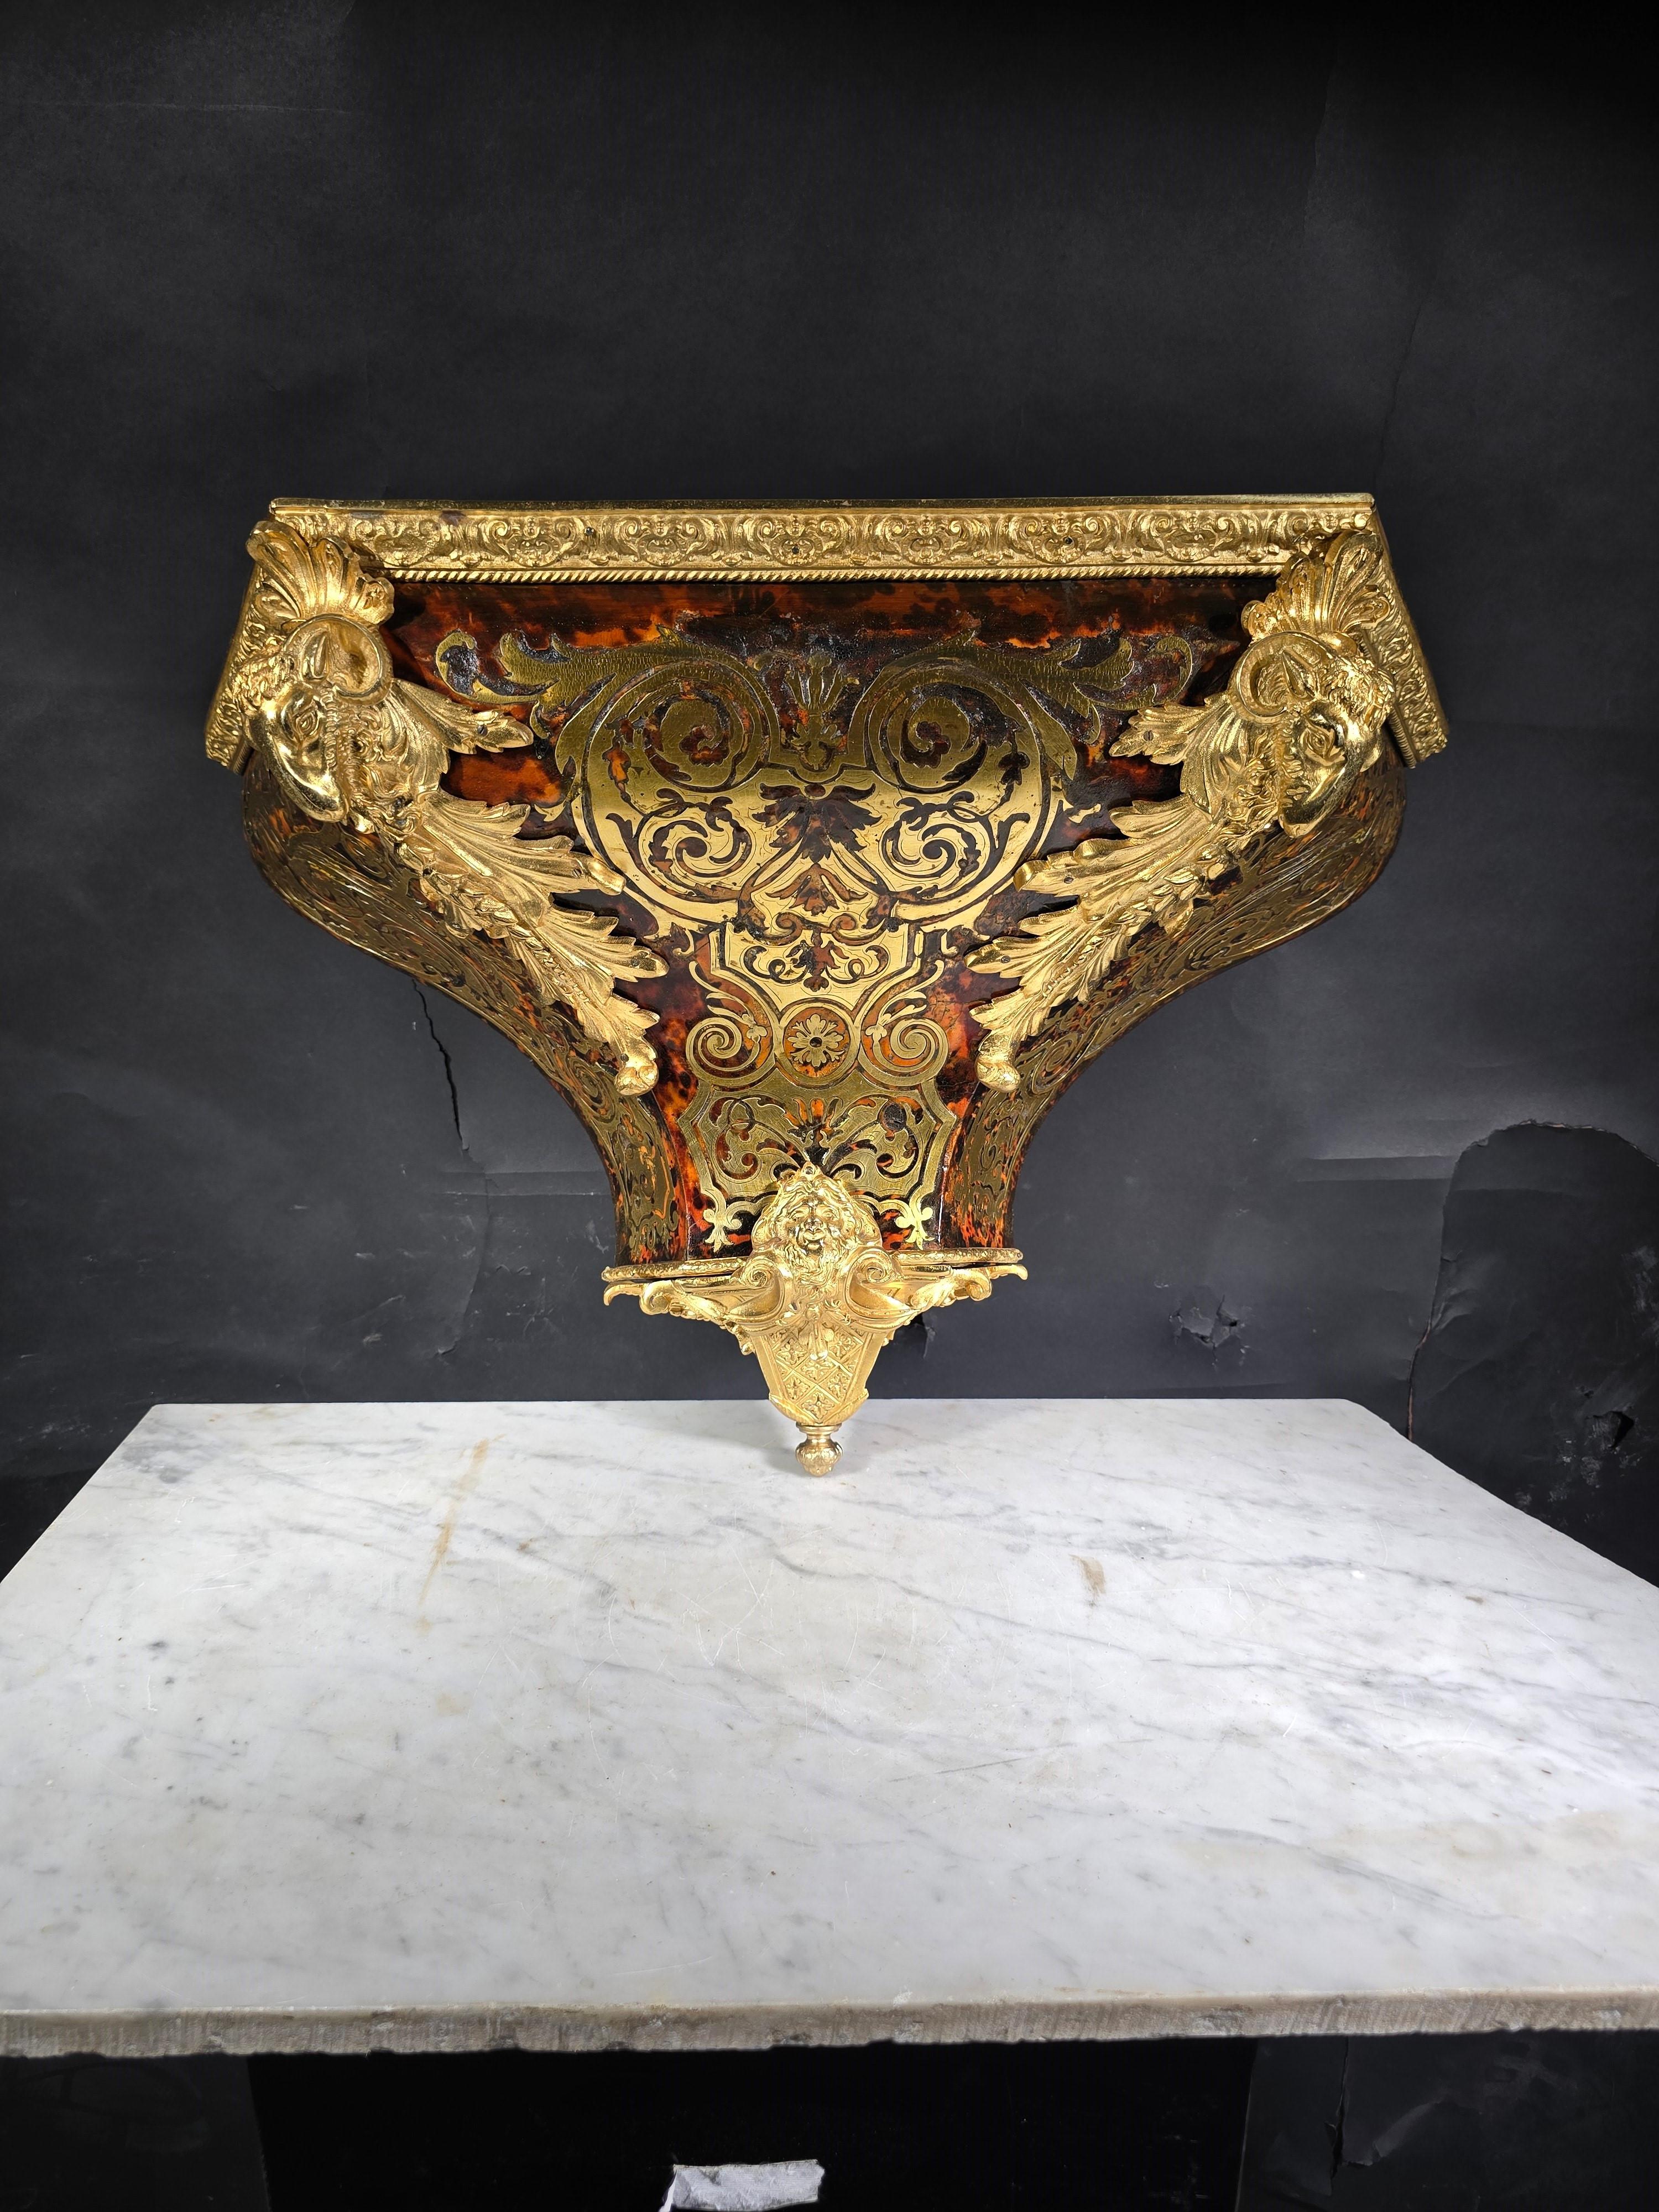 Step back in time to the 18th century with this elegant wall pedestal, a remarkable piece featuring Boulle marquetry and mercury gilt bronzes. This pedestal embodies the refinement and opulence of the Baroque era, adding a touch of luxury to any